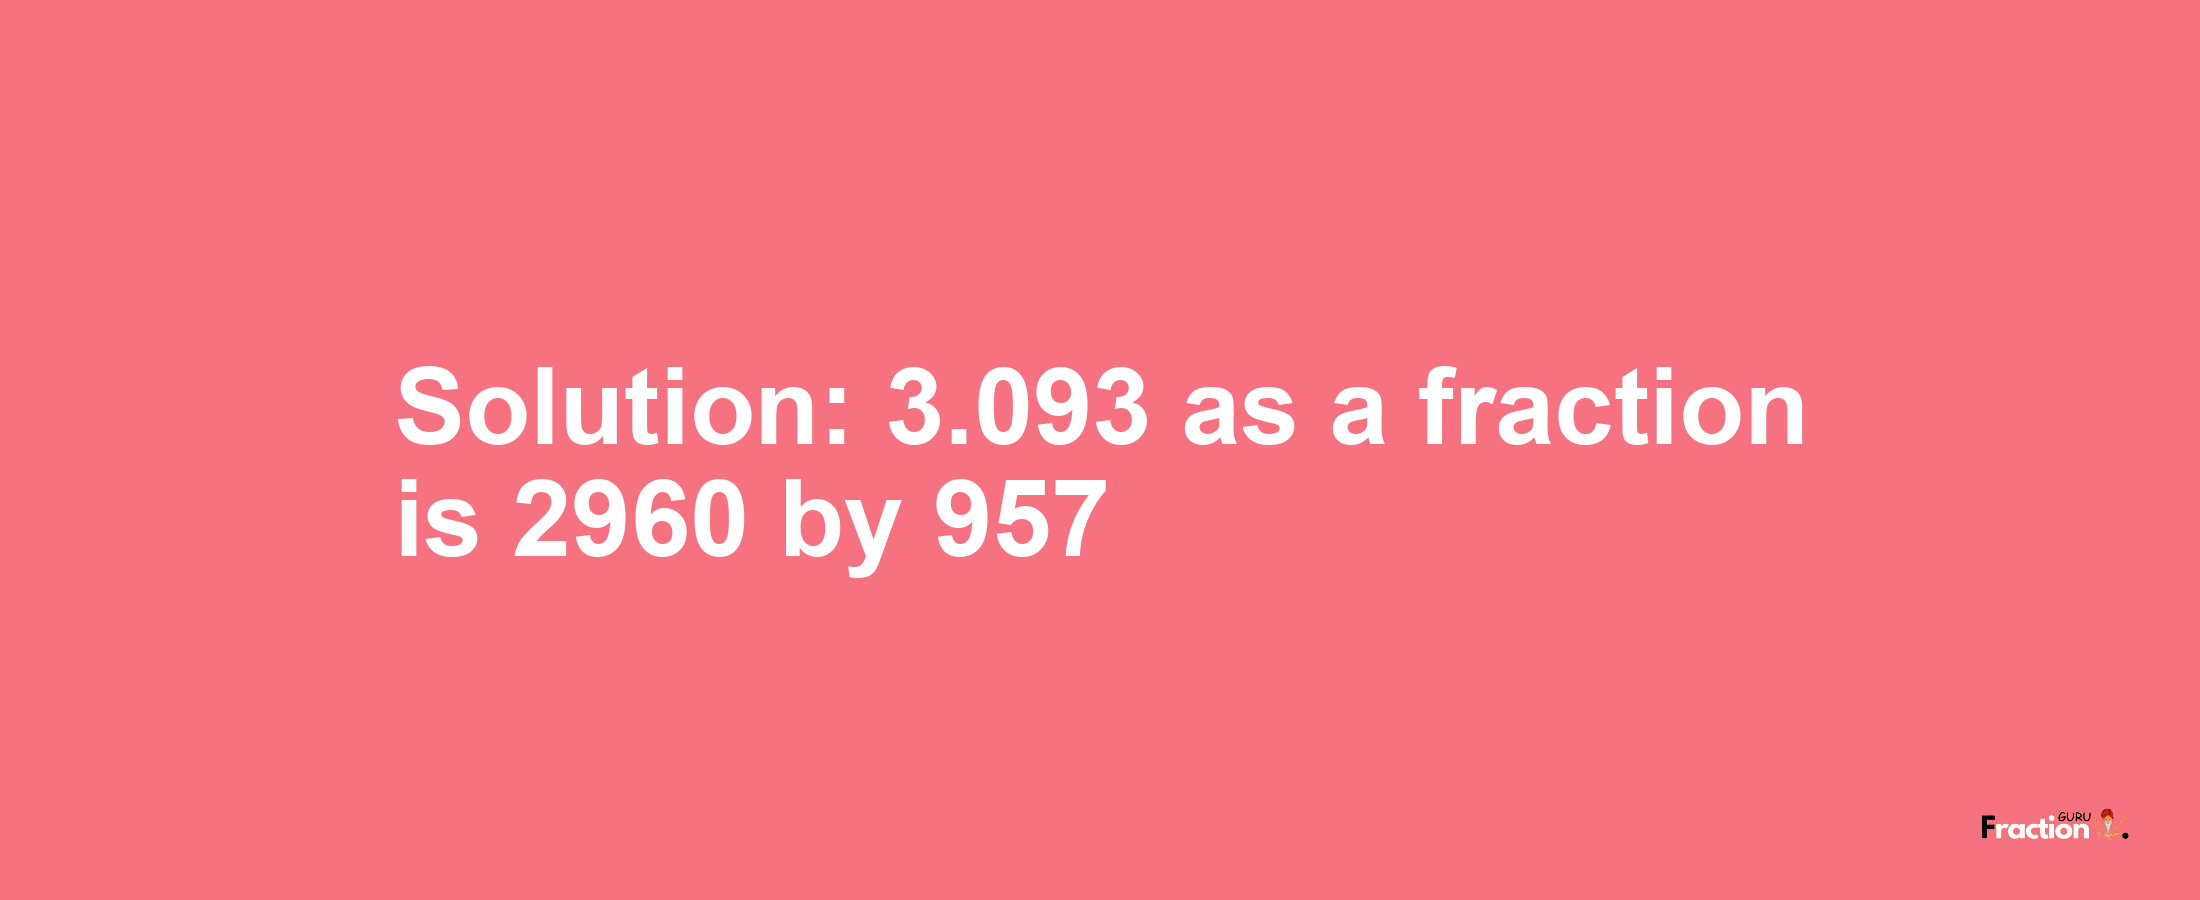 Solution:3.093 as a fraction is 2960/957